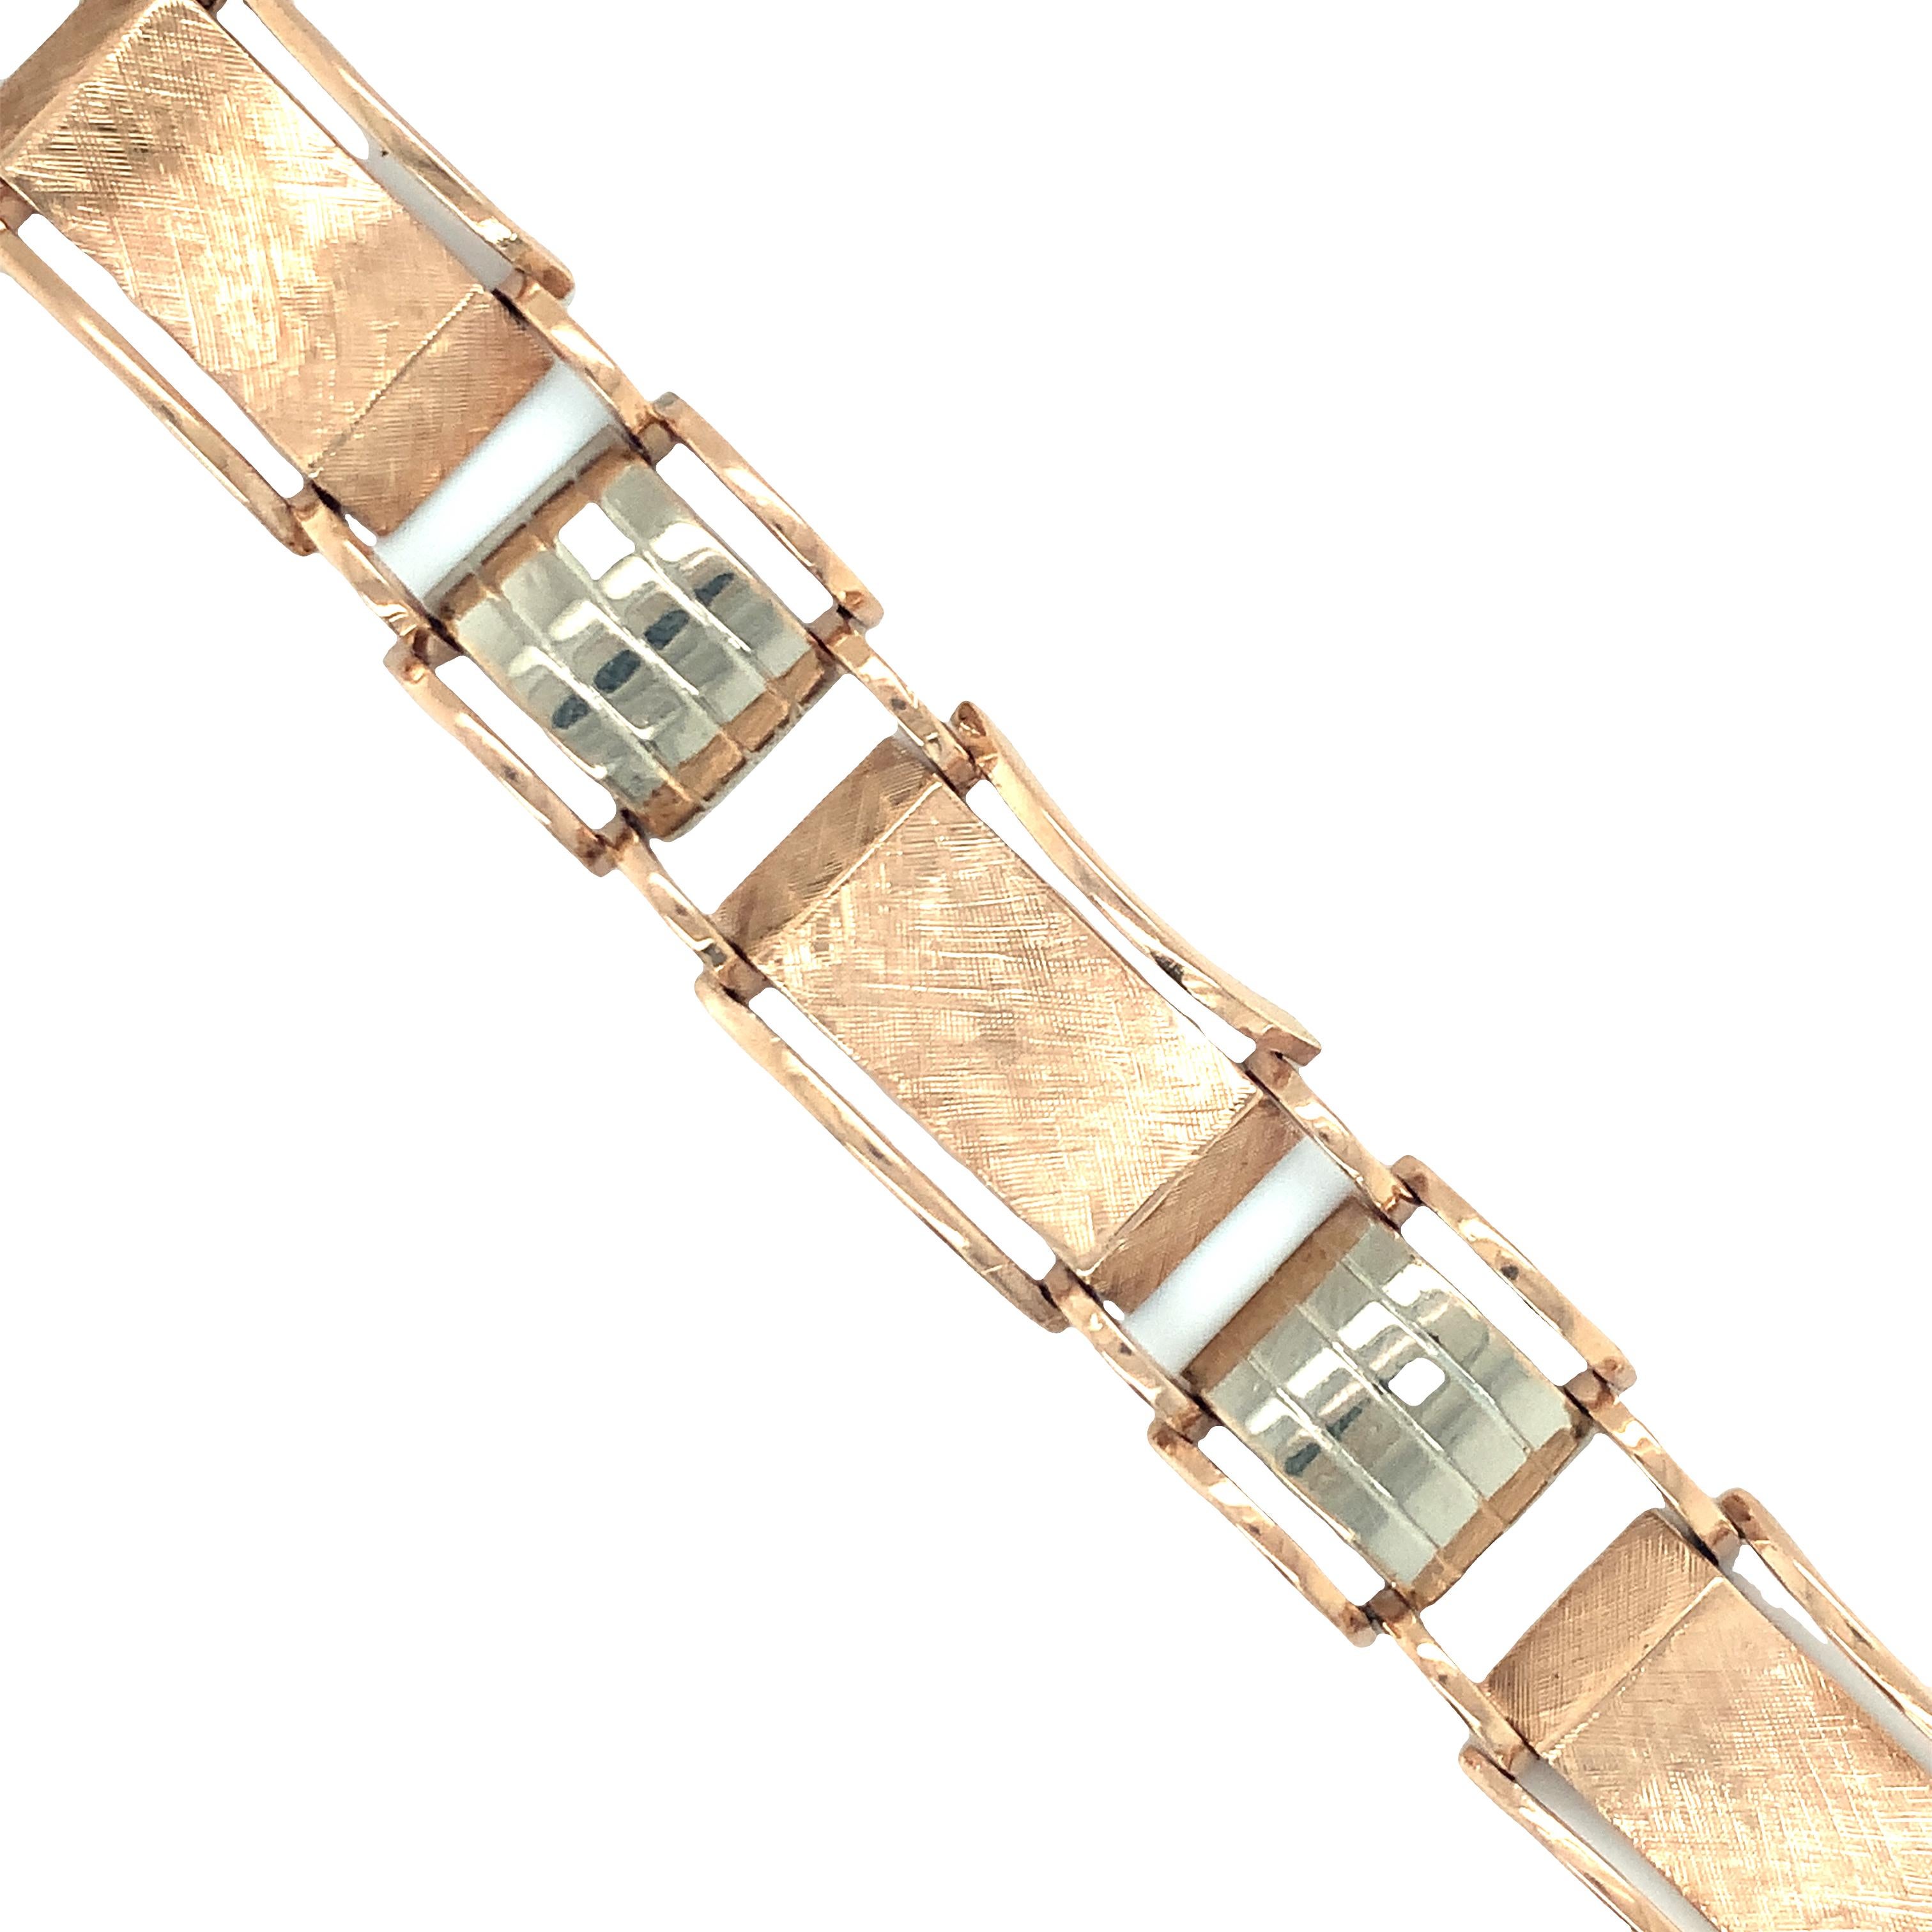 One Retro 14K rose and white gold link bracelet featuring textured and high polish finish links alternating throughout. Circa 1940s.

Chic, stackable, pretty.

Metal: 14K rose and white gold
Stamp/Hallmark: 14K
Size/Measurements: 7 inches